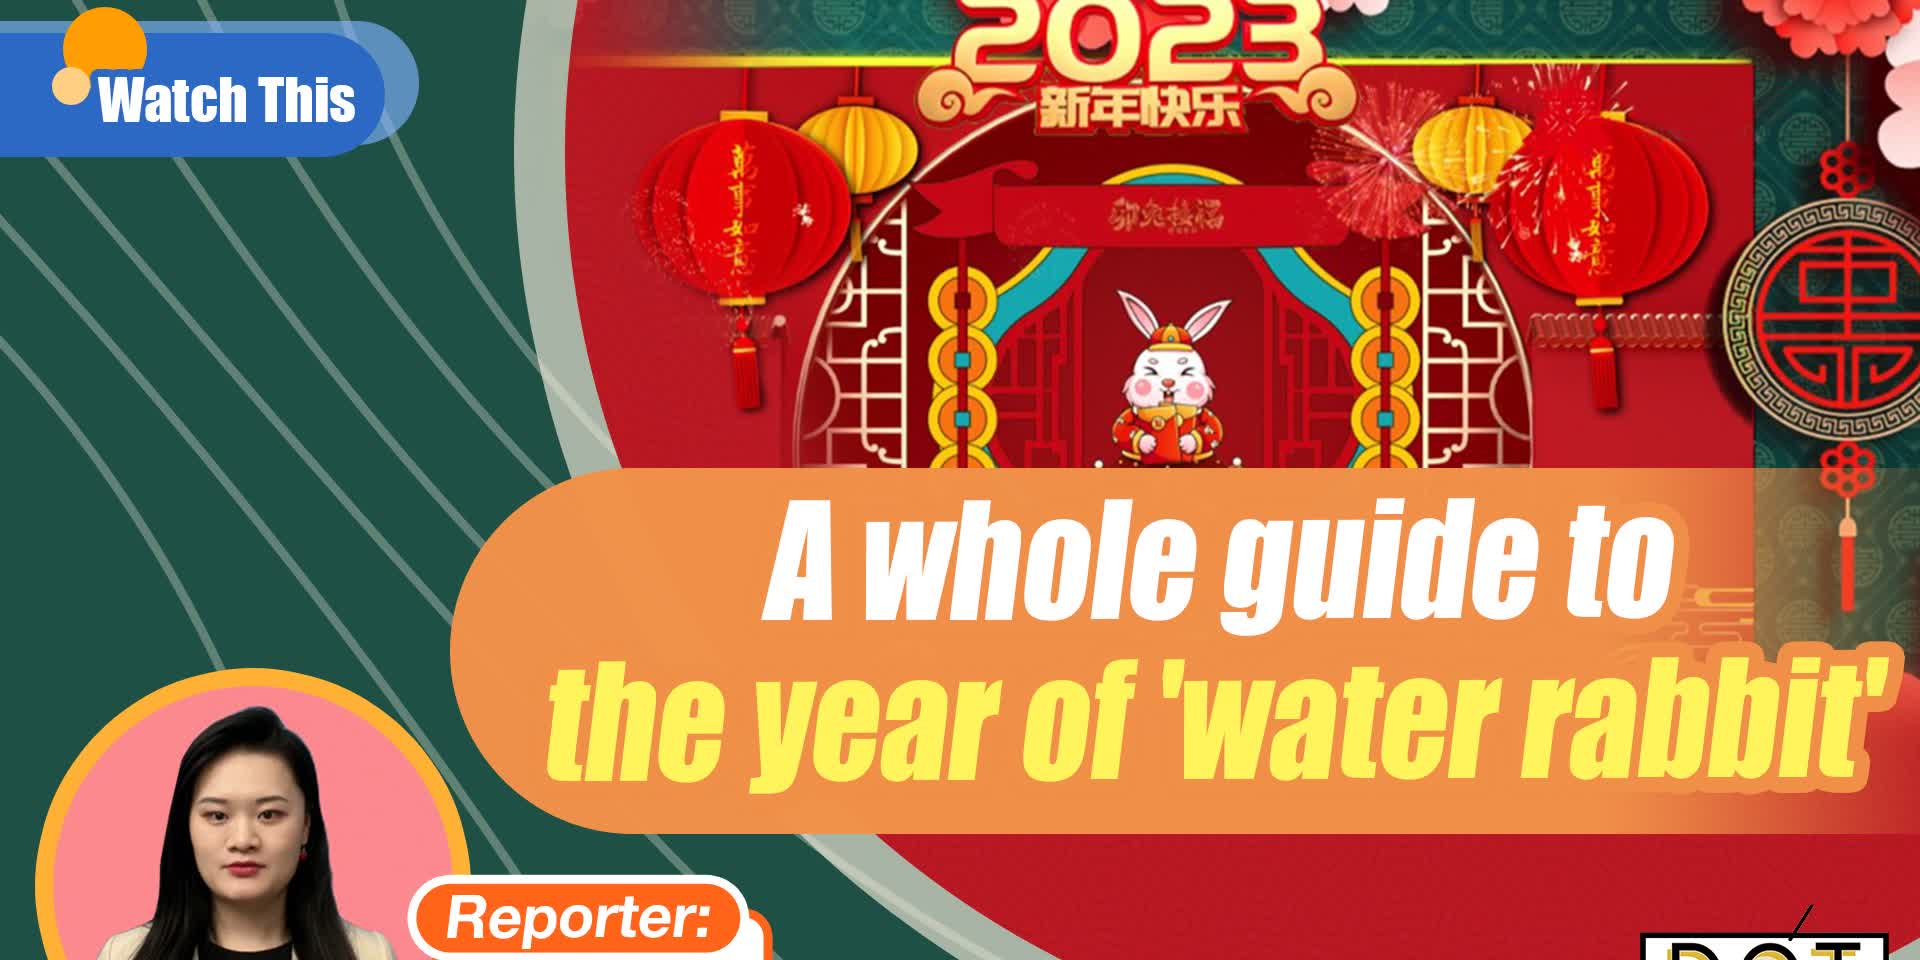 Watch This | A whole guide to the year of 'water rabbit'